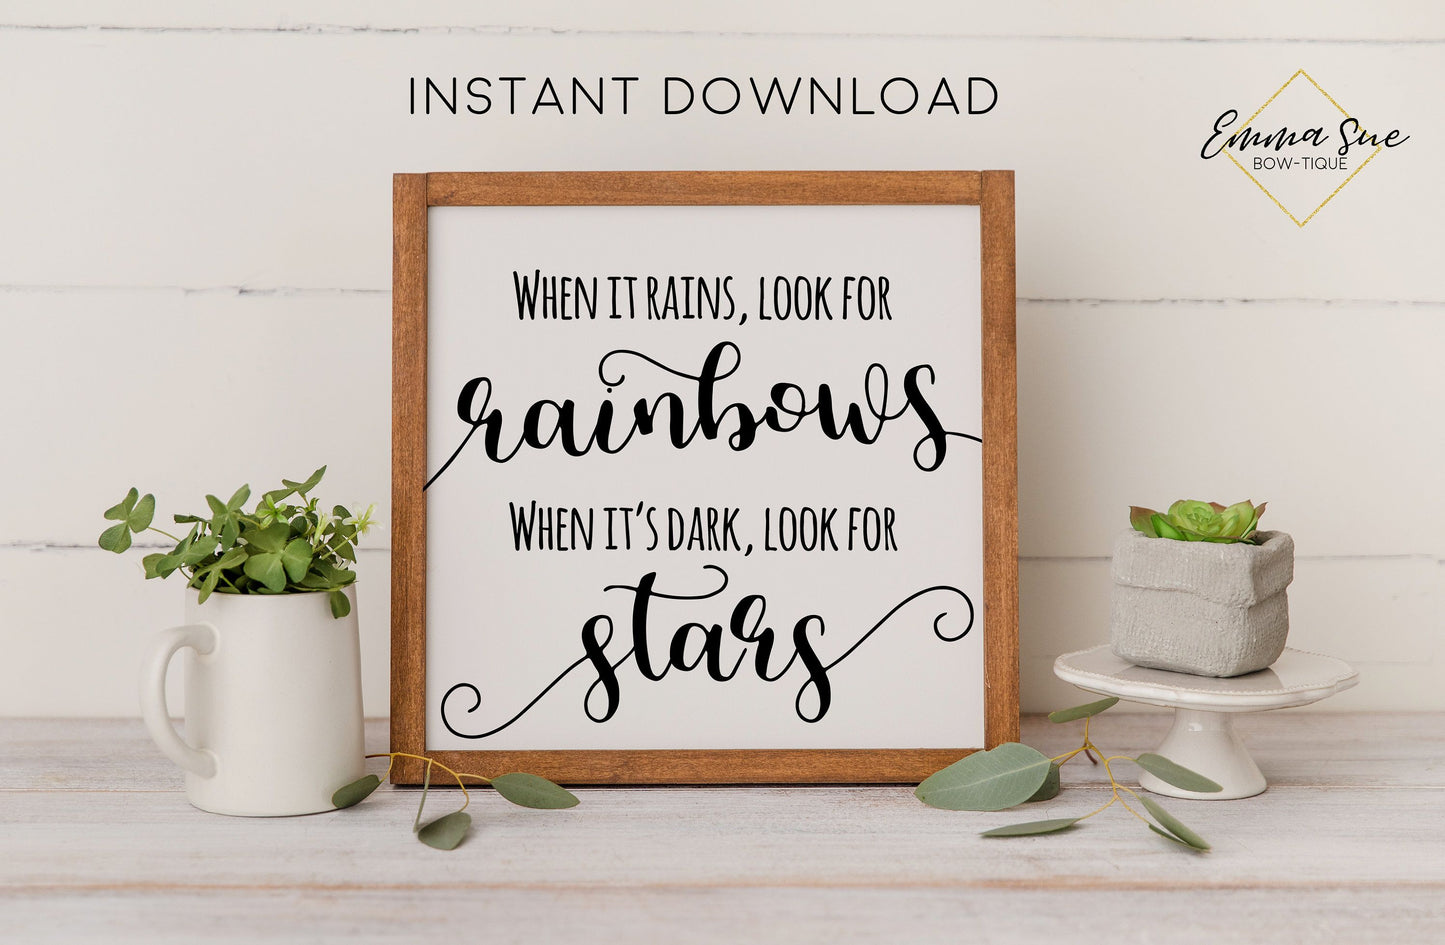 When it rains look for rainbows, When it's dark look for stars - Motivational Quote Printable Sign